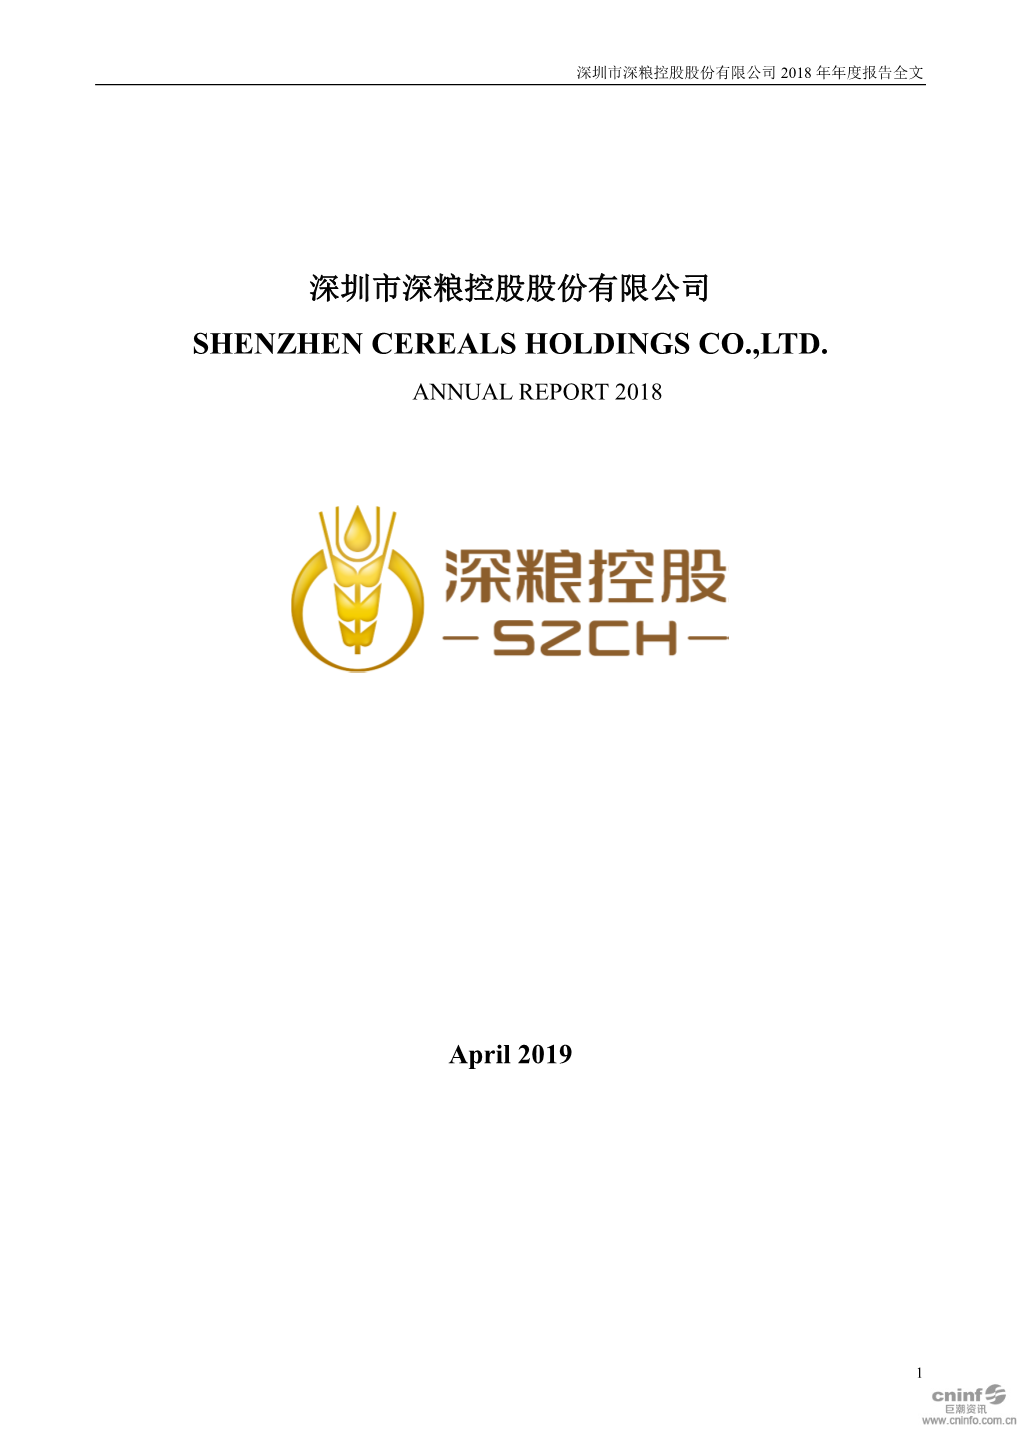 Shenzhen Cereals Holdings Co.,Ltd. Annual Report 2018